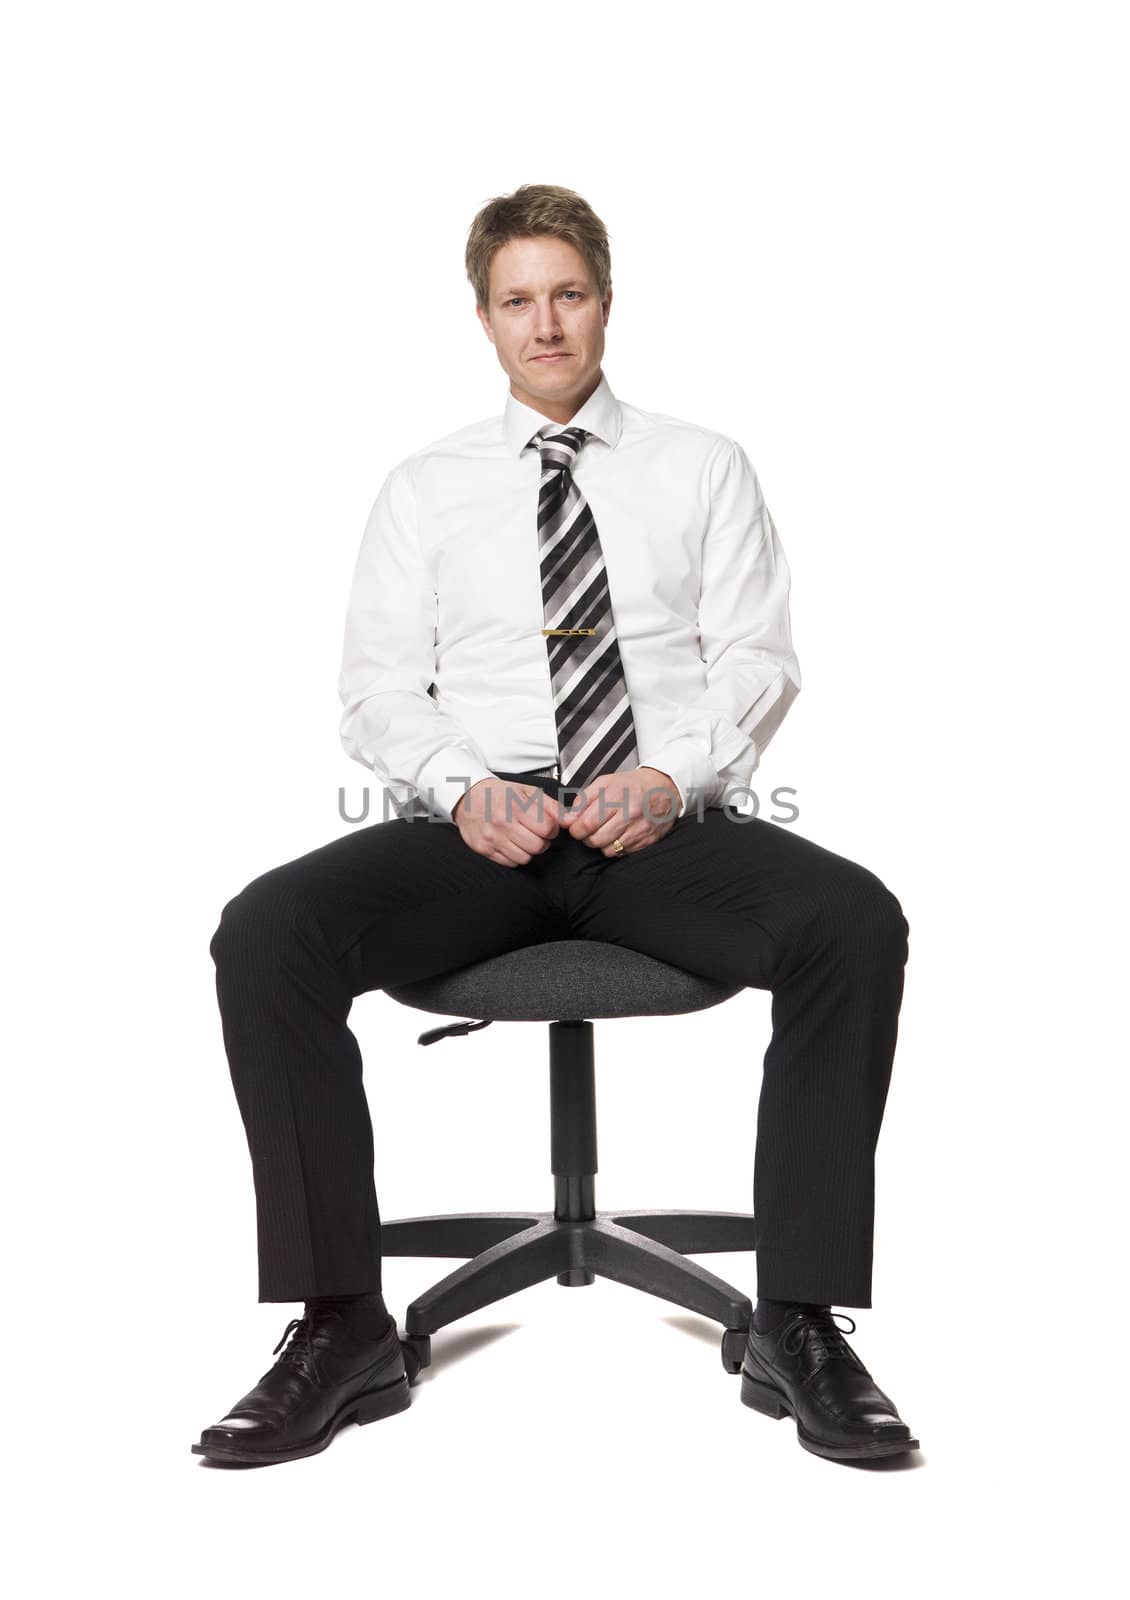 Man siting on an office chair